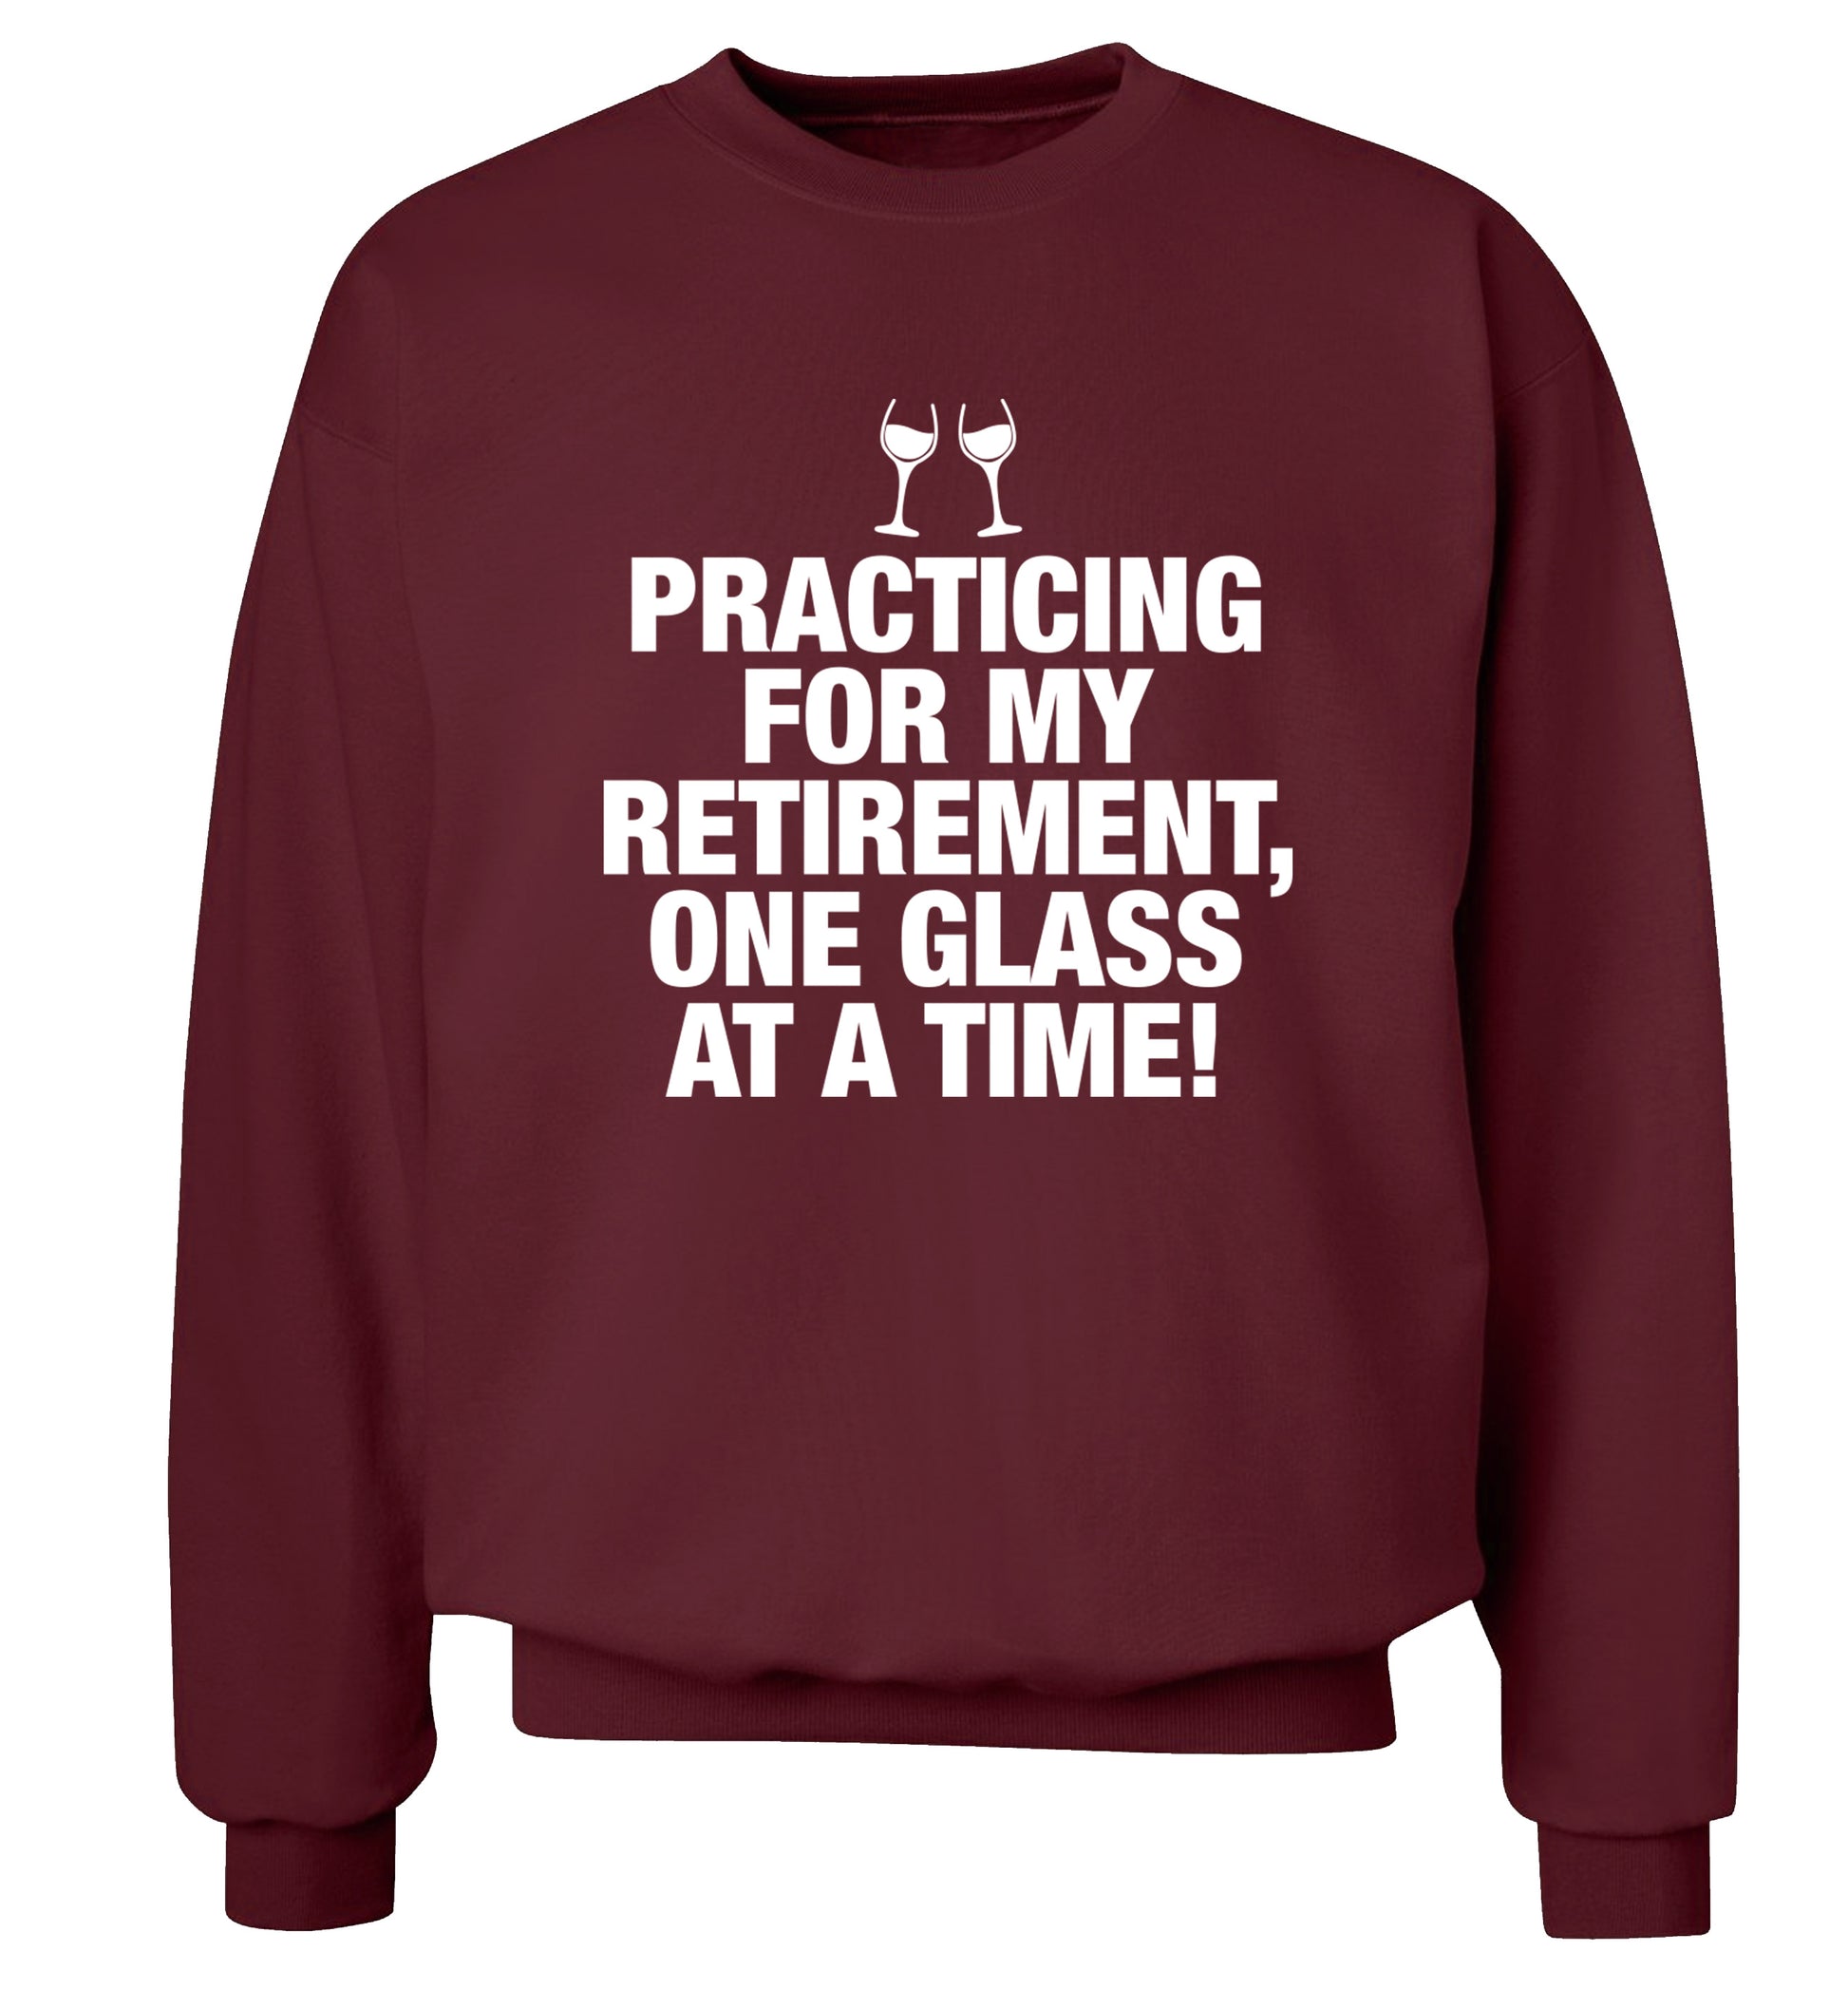 Practicing my retirement one glass at a time Adult's unisex maroon Sweater 2XL